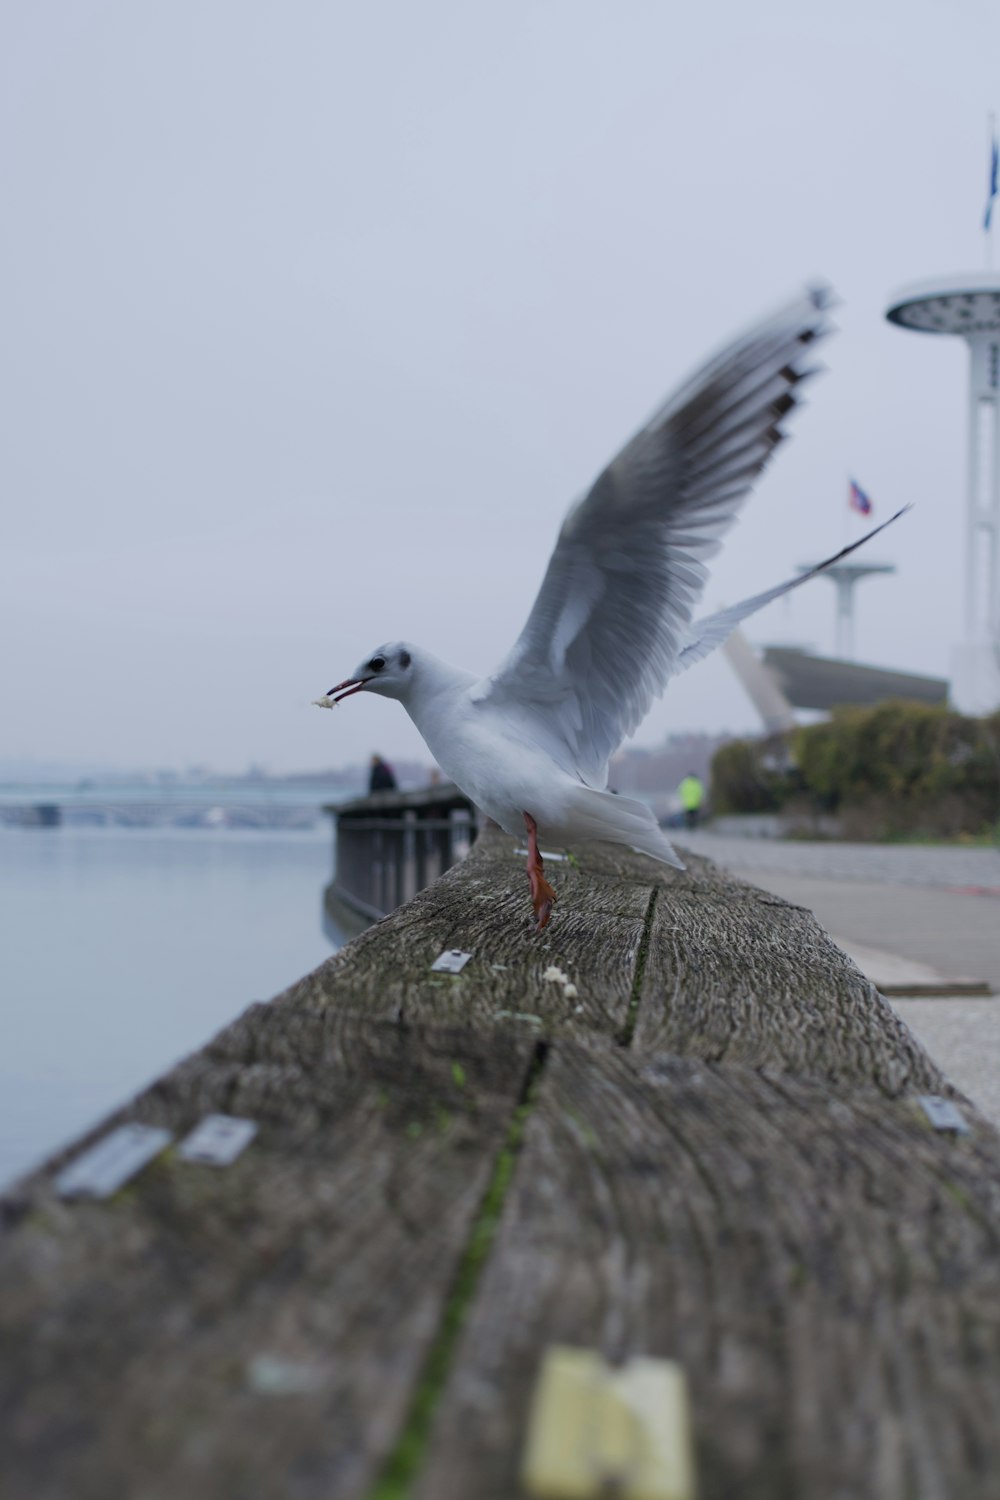 a seagull flying over a wooden pier next to a body of water